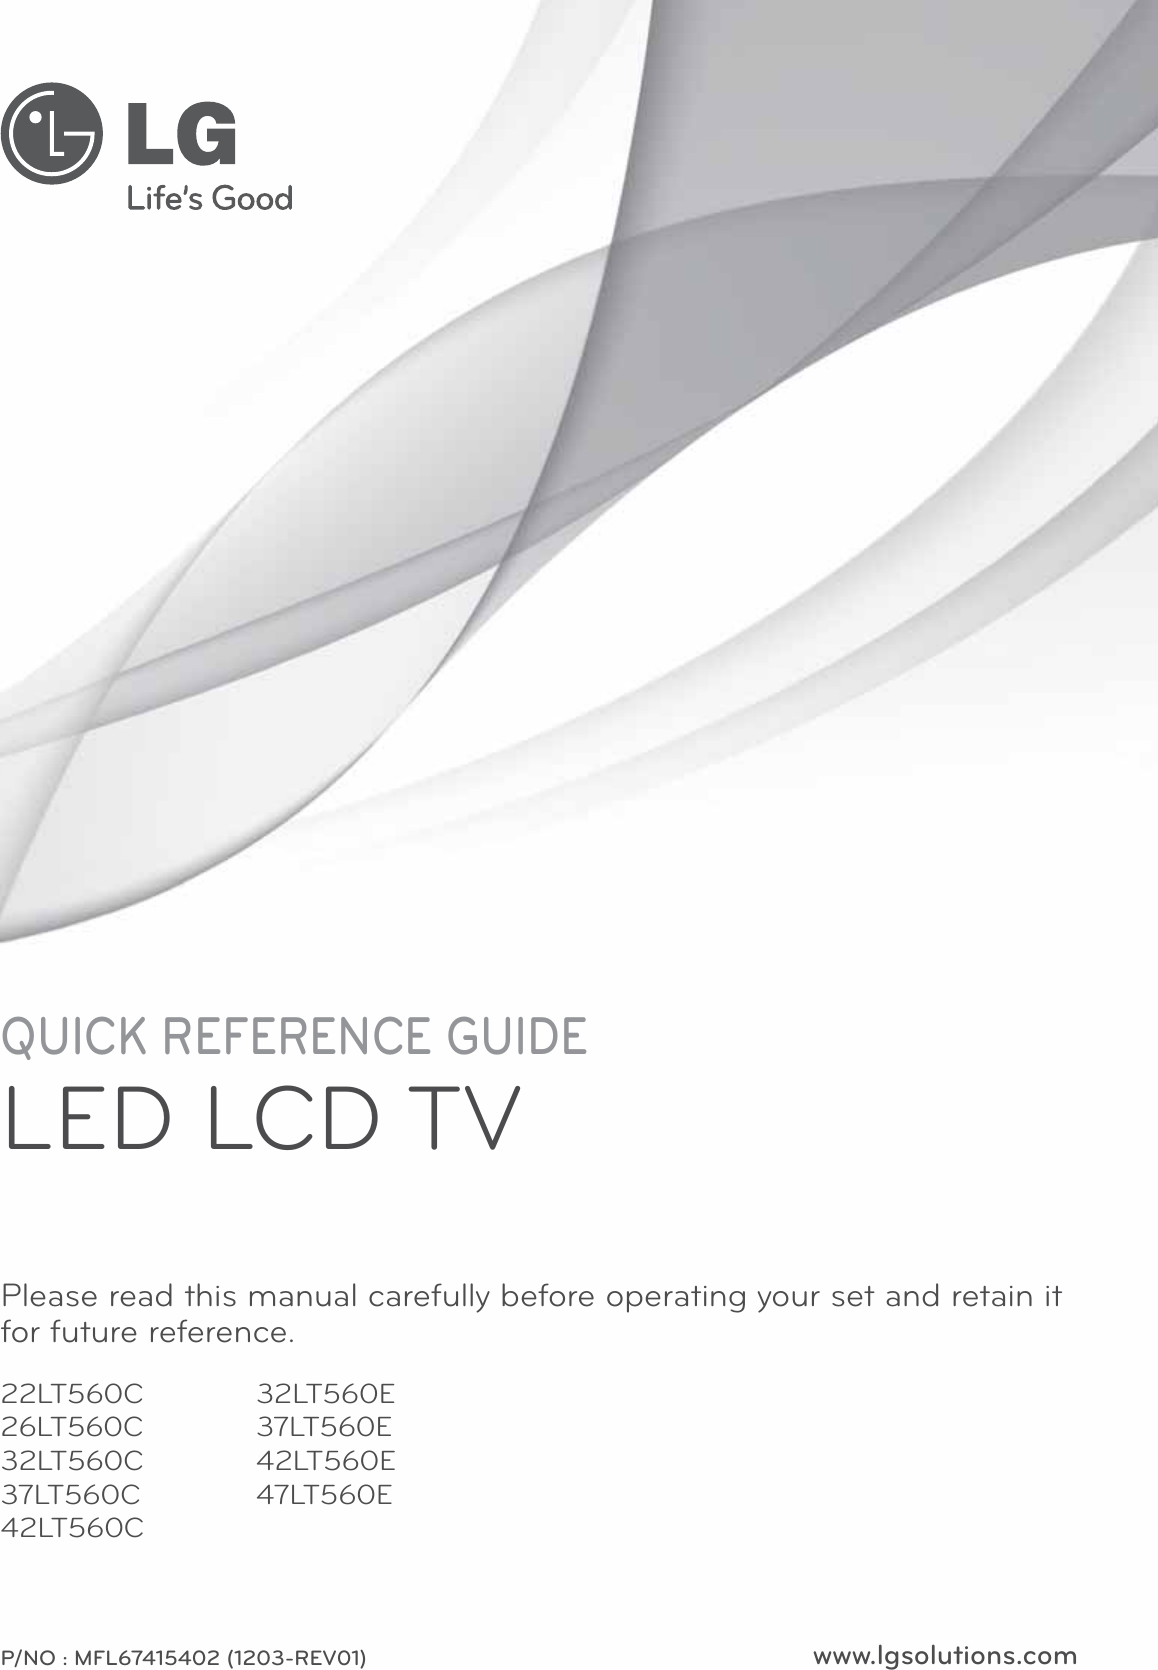 www.lgsolutions.comQUICK REFERENCE GUIDELED LCD TVPlease read this manual carefully before operating your set and retain it for future reference.P/NO : MFL67415402 (1203-REV01)22LT560C26LT560C32LT560C37LT560C42LT560C32LT560E37LT560E42LT560E47LT560E